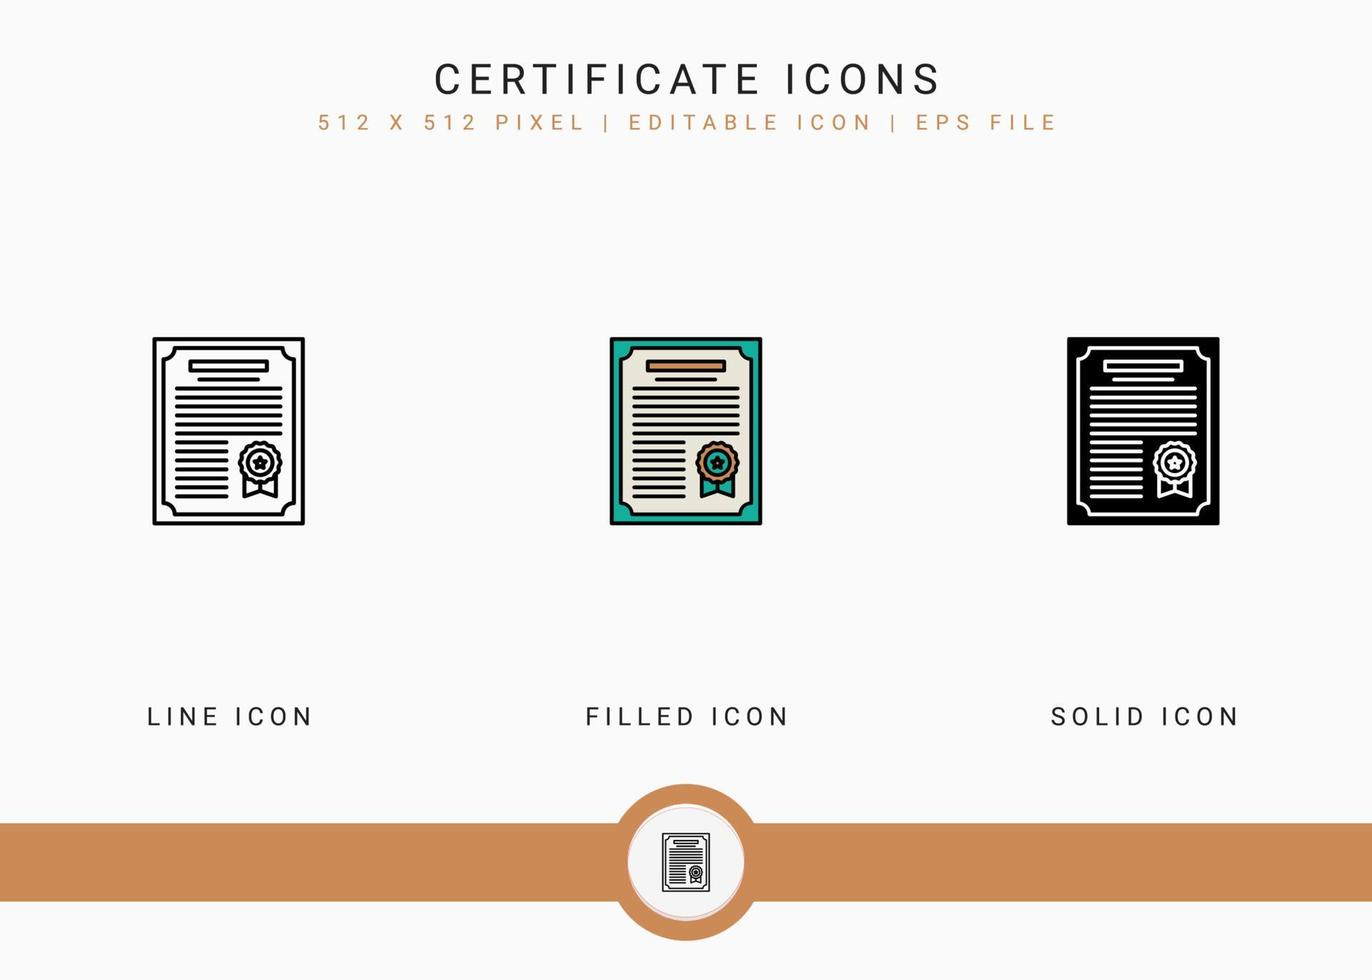 Certificate icons set vector illustration with solid icon line style. Winner award concept. Editable stroke icon on isolated background for web design, user interface, and mobile app